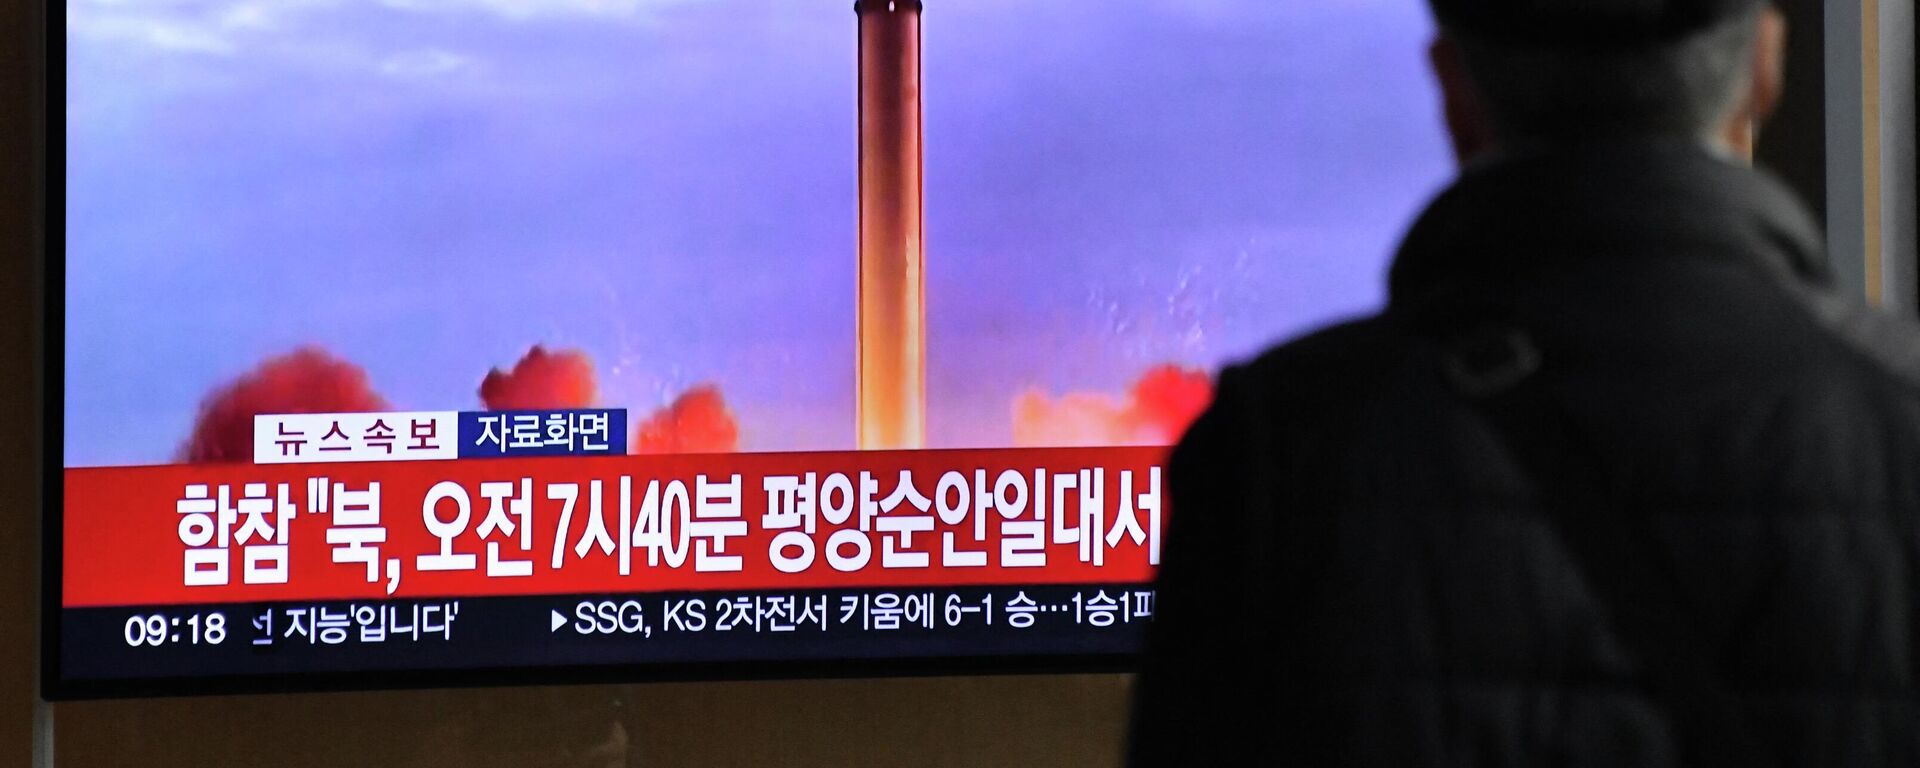 A man watches a television screen showing a news broadcast with file footage of a North Korean missile test, at a railway station in Seoul on November 3, 2022 - Sputnik International, 1920, 17.11.2022